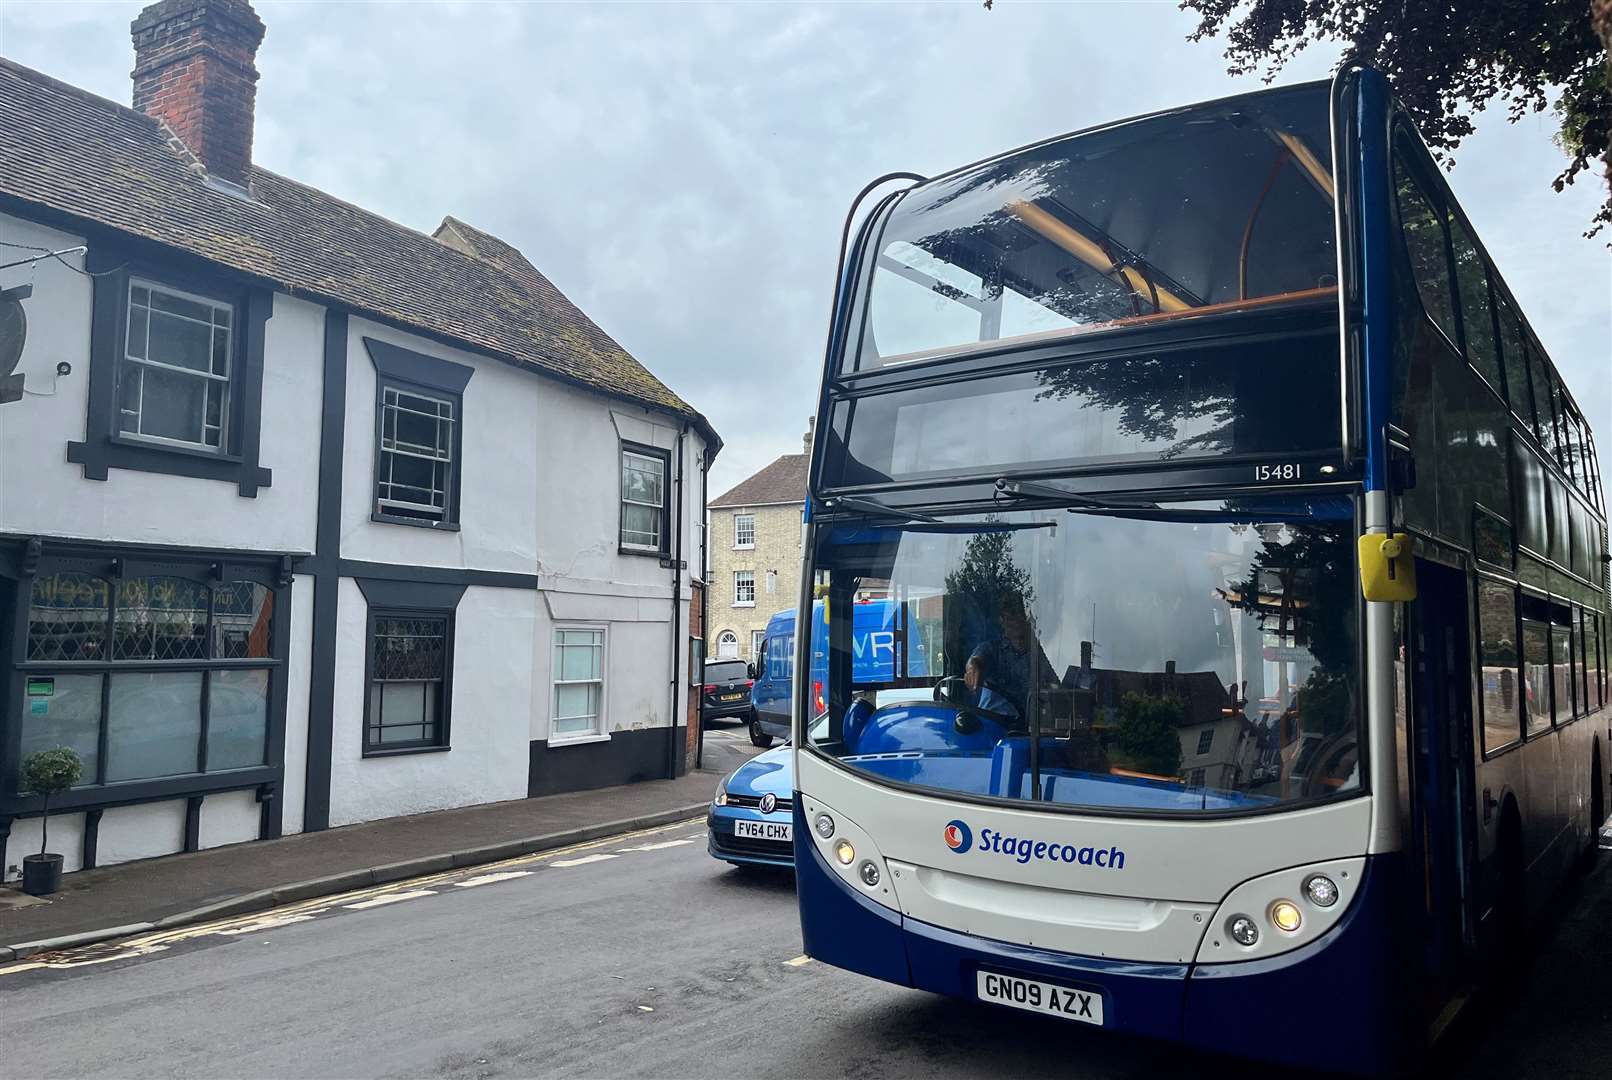 Stagecoach is cancelling thousands of bus services